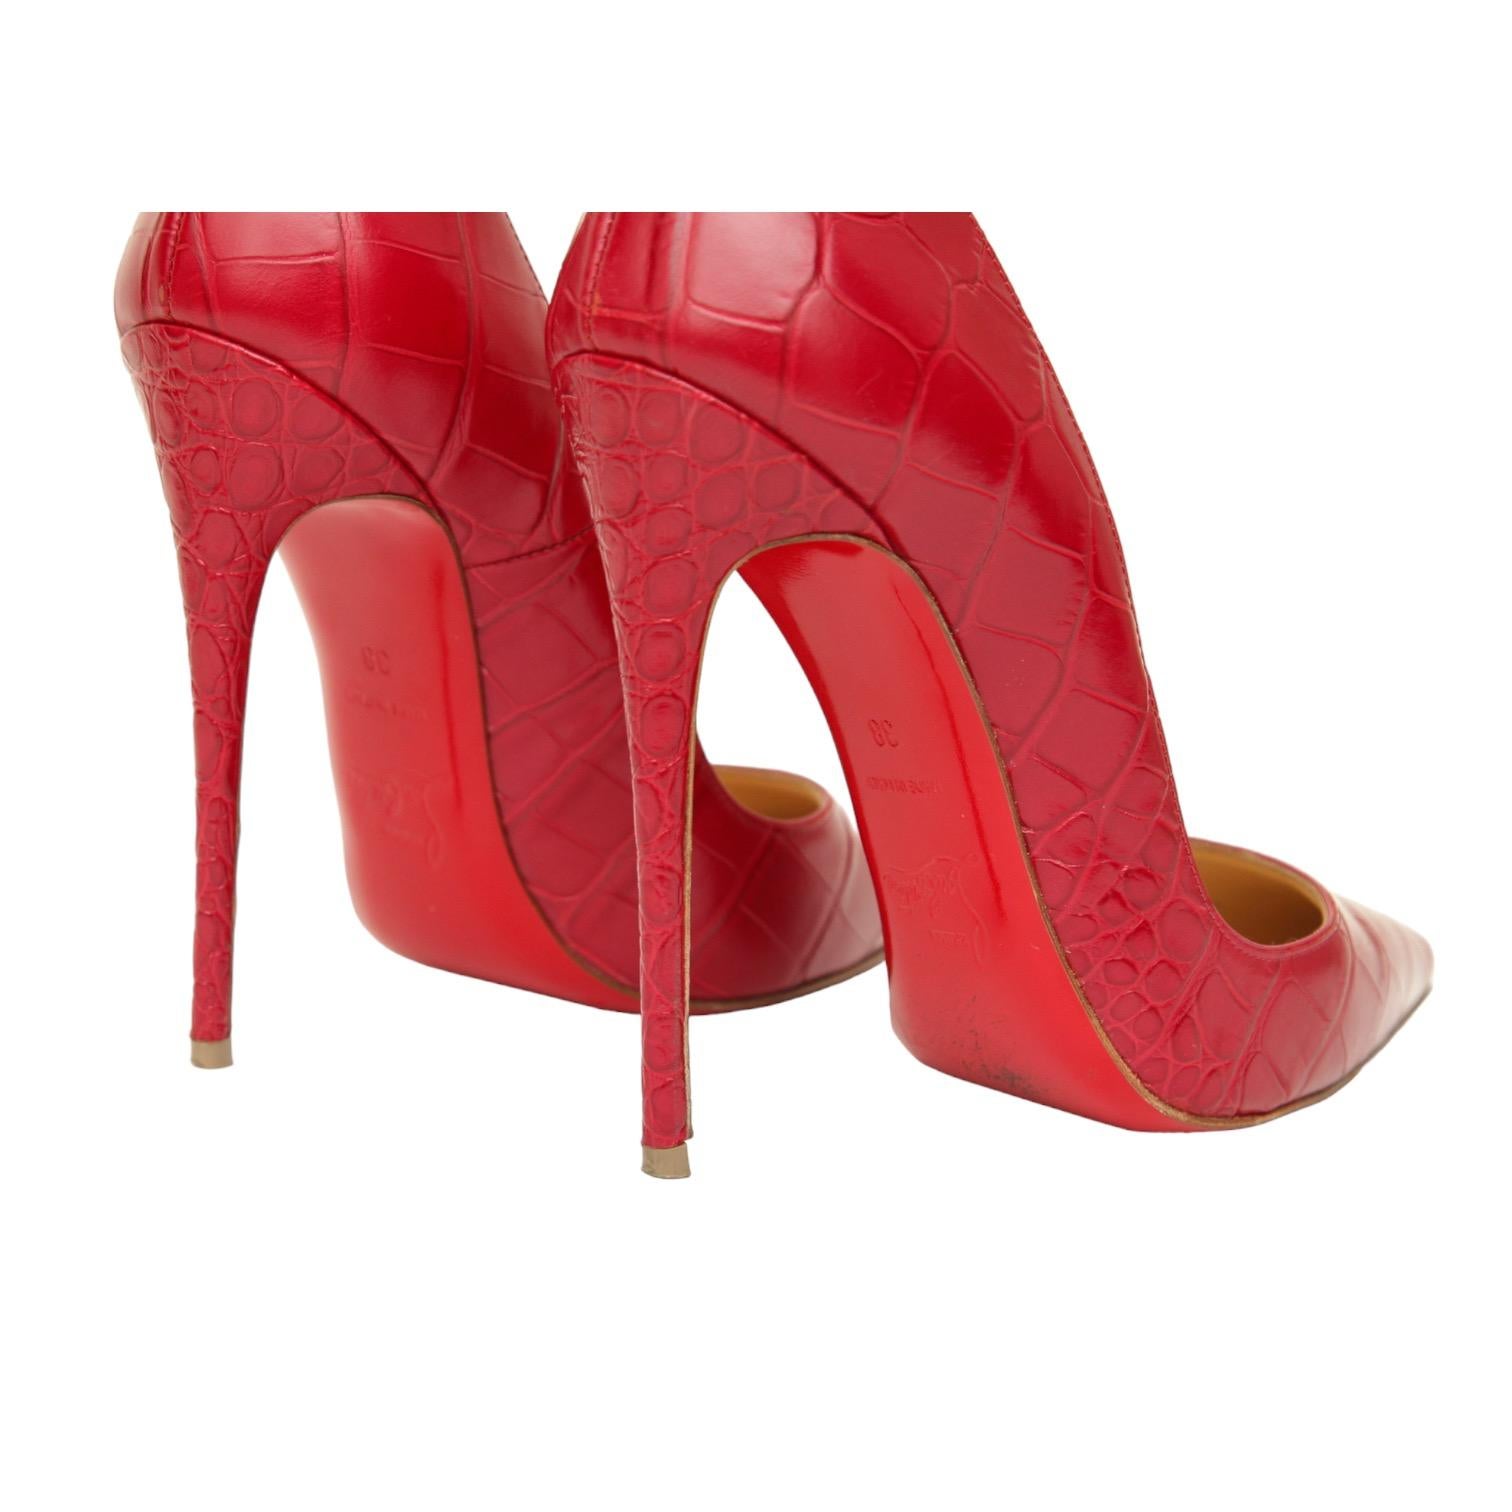 CHRISTIAN LOUBOUTIN So Kate 120 Red Pink Faux Croc Leather Pump Pointed Toe 38 For Sale 2